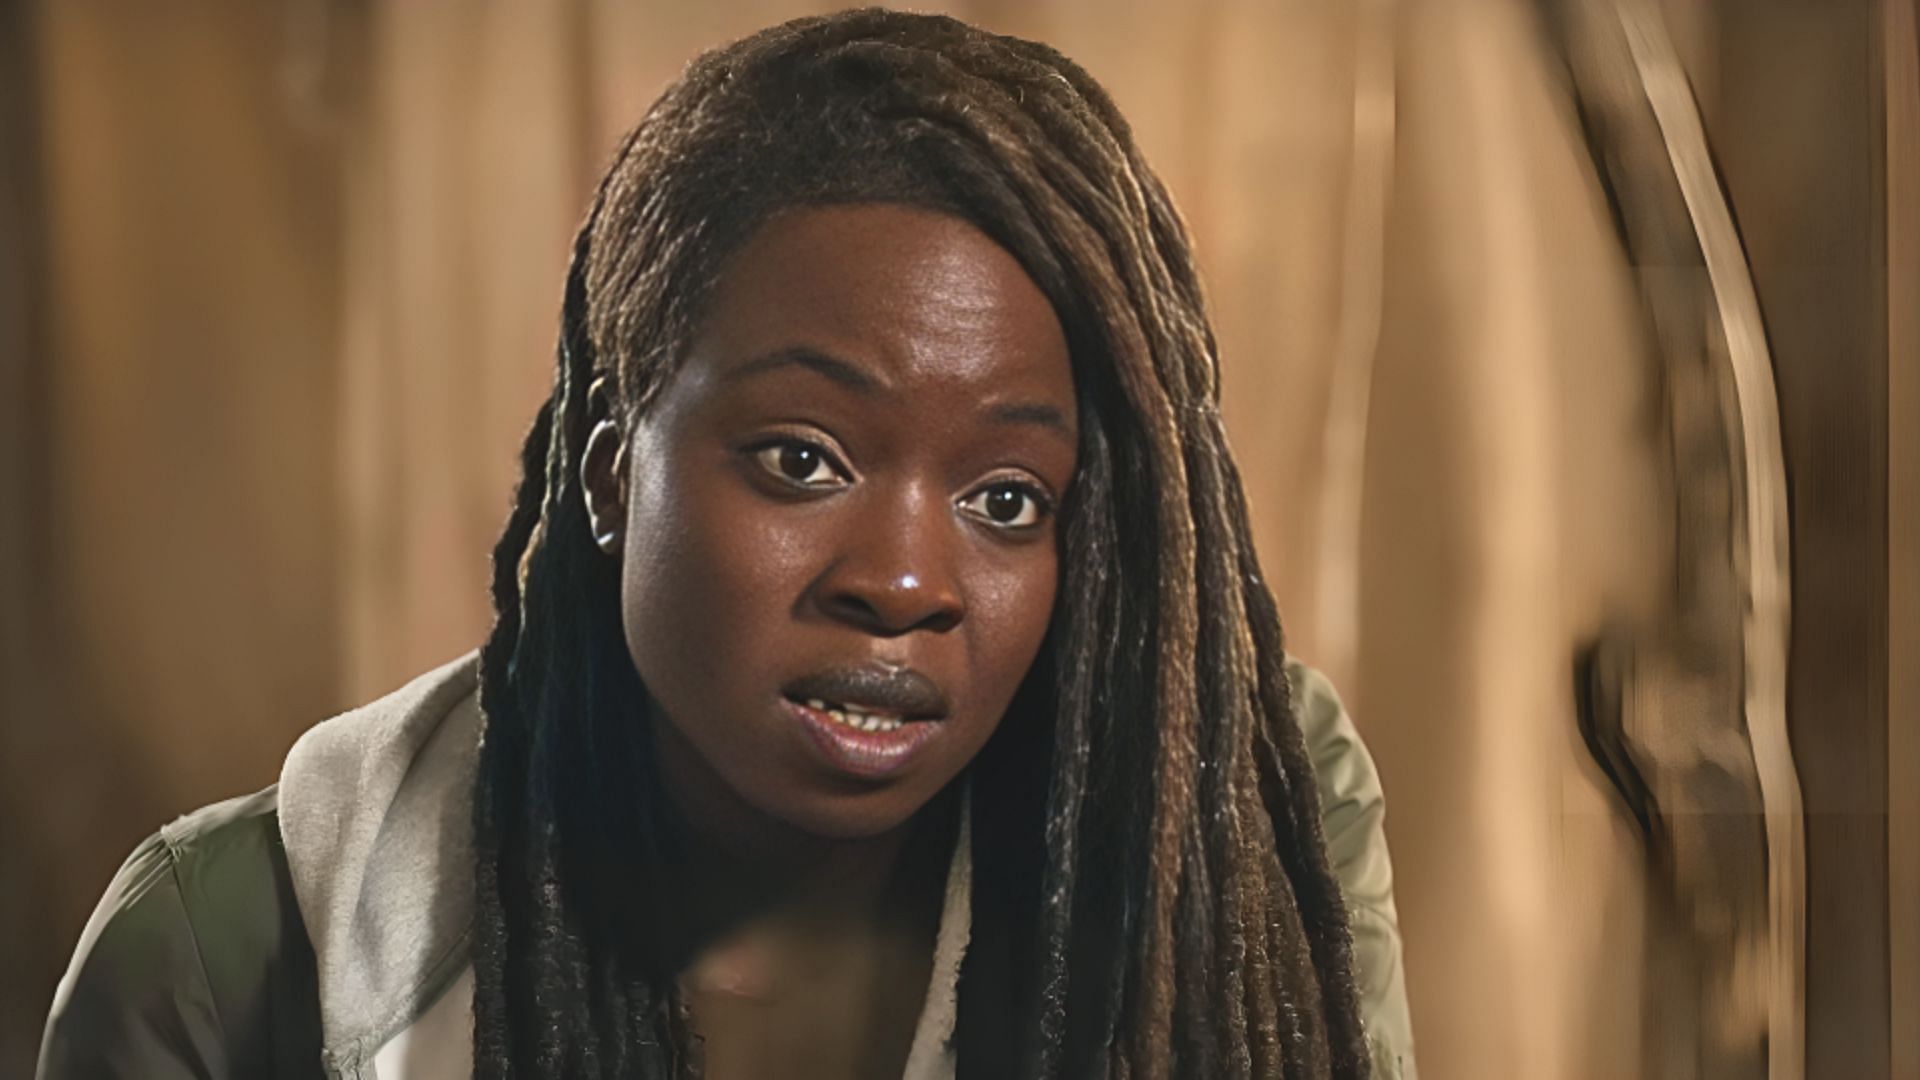 Michonne, portrayed by Danai Gurira, is a central character in The Walking Dead series (Image via YouTube/The Walking Dead, 1:23)